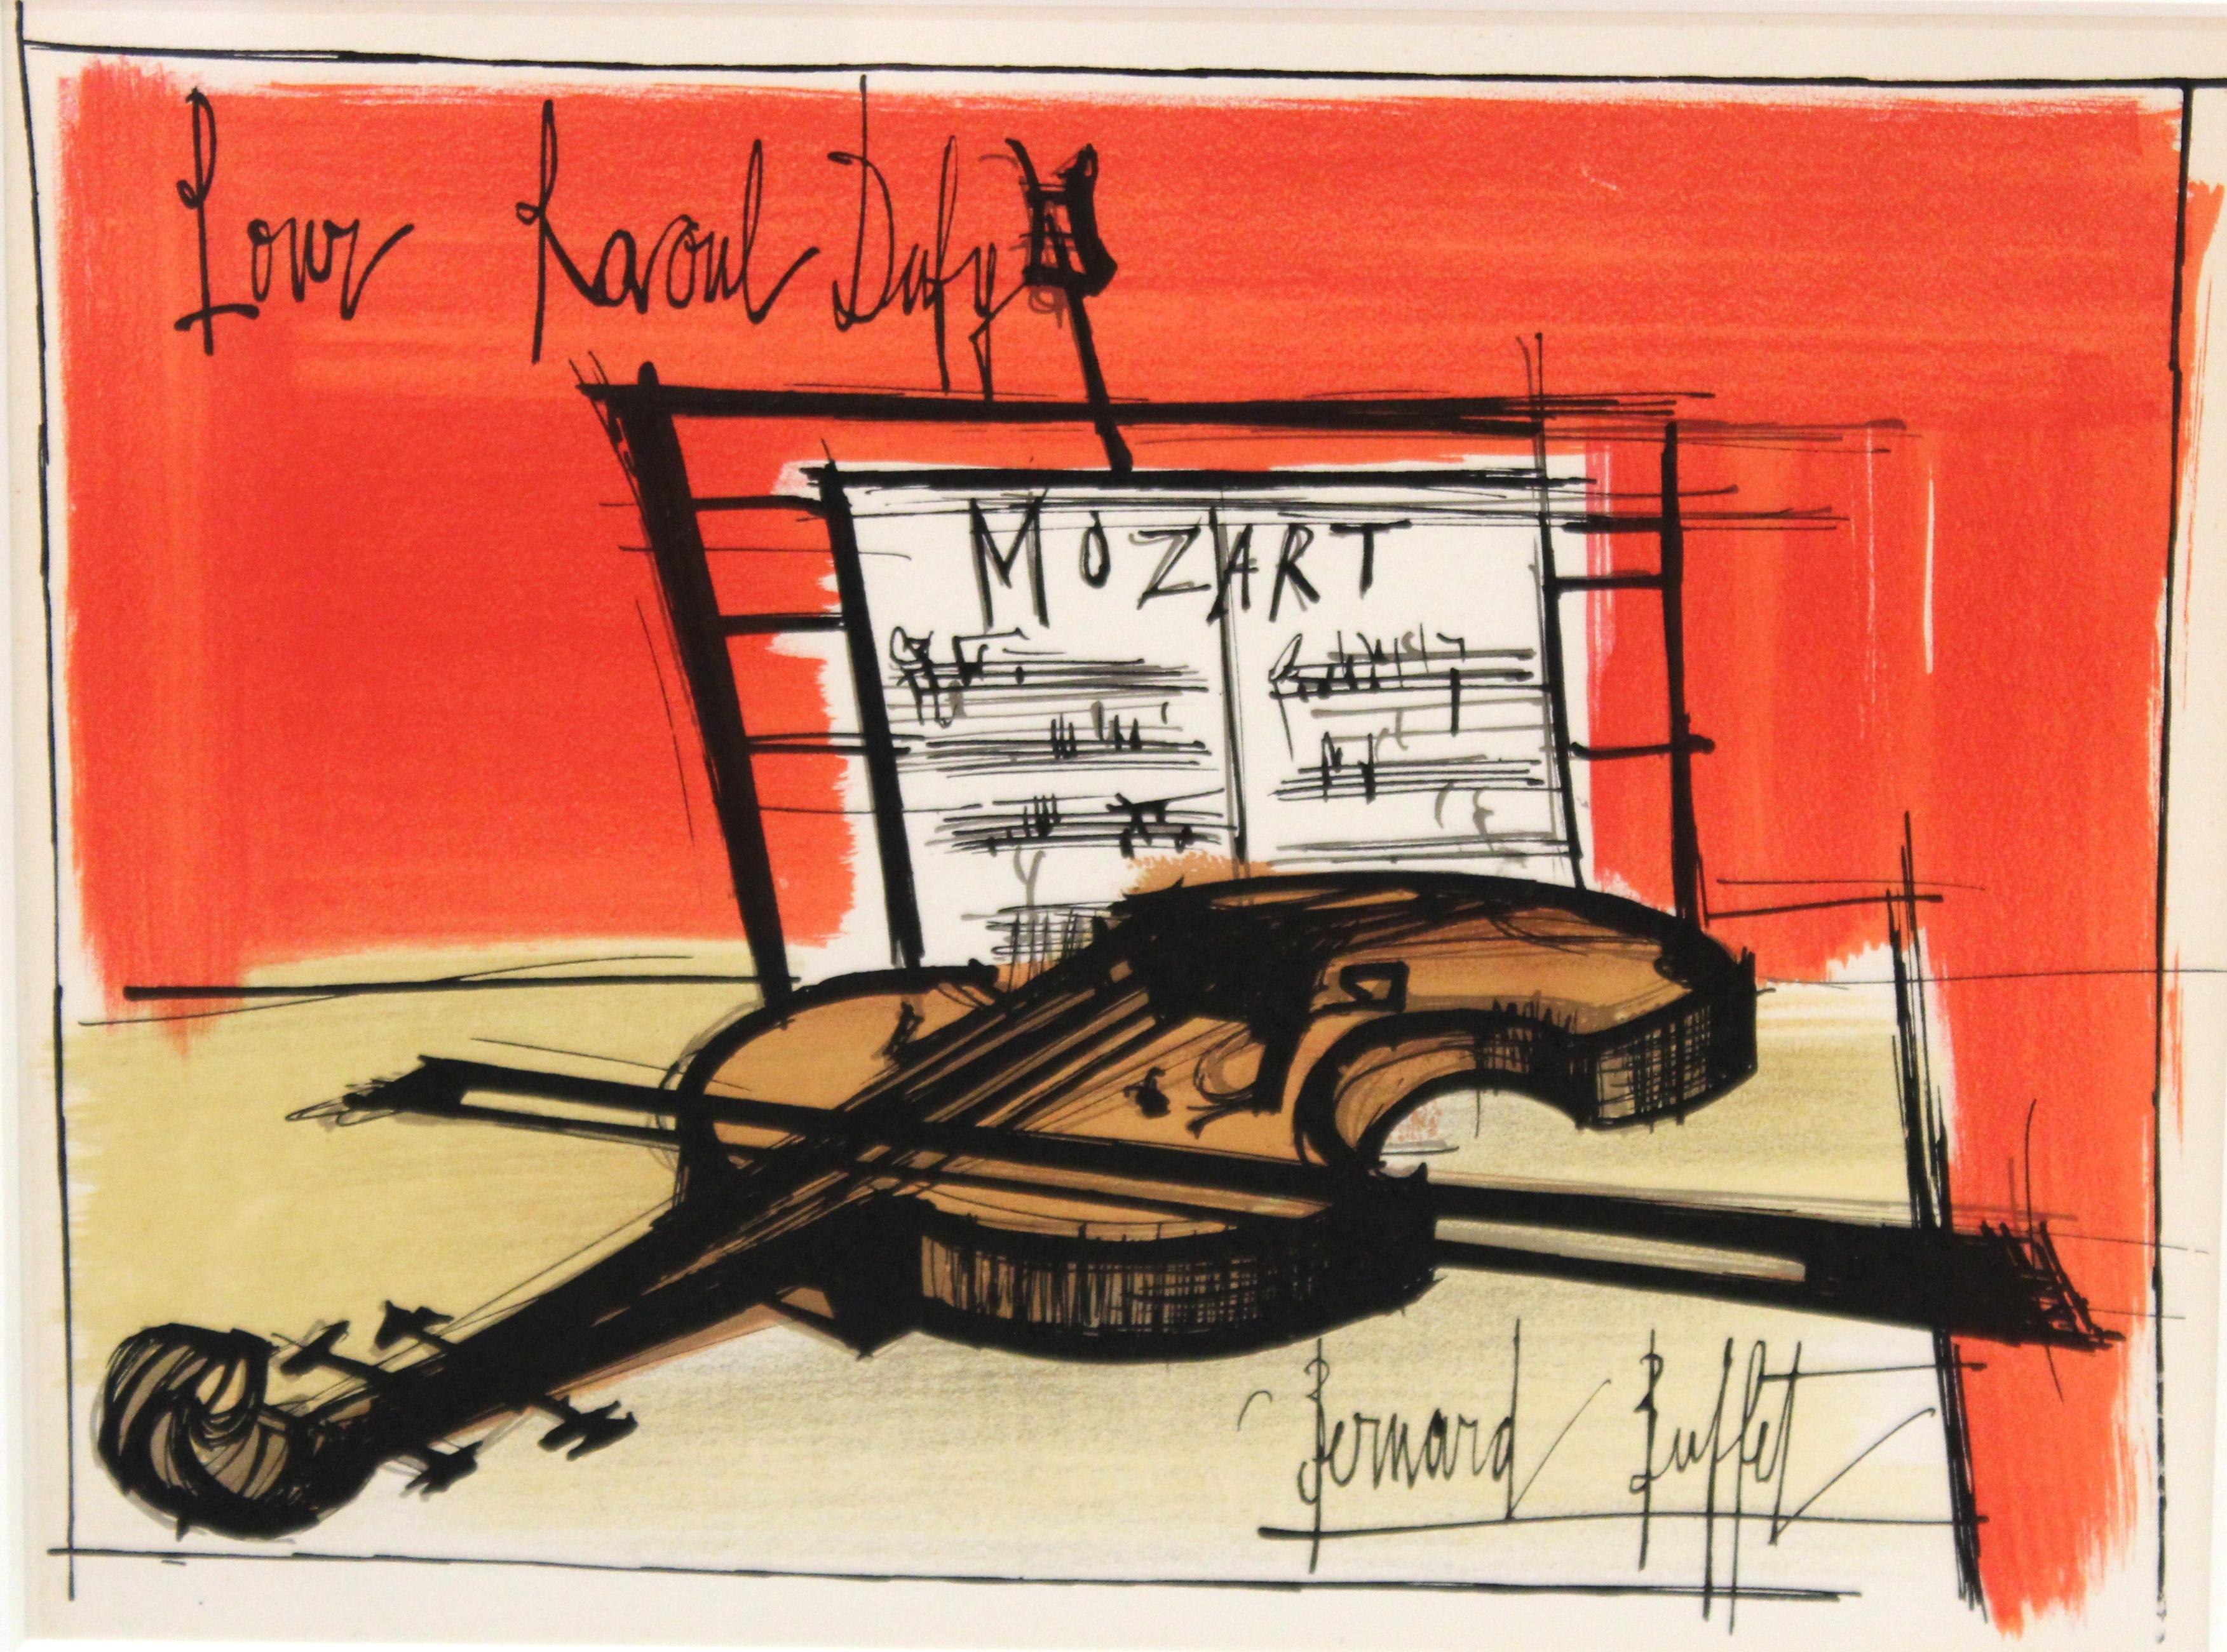 Modern framed color lithograph titled 'Pour Raoul Dufy' after Bernard Buffet. The piece was printed in 1965 after a watercolor published in the book 'Lettre a mon peintre Raoul Dufy'. In great vintage condition with age-appropriate wear.